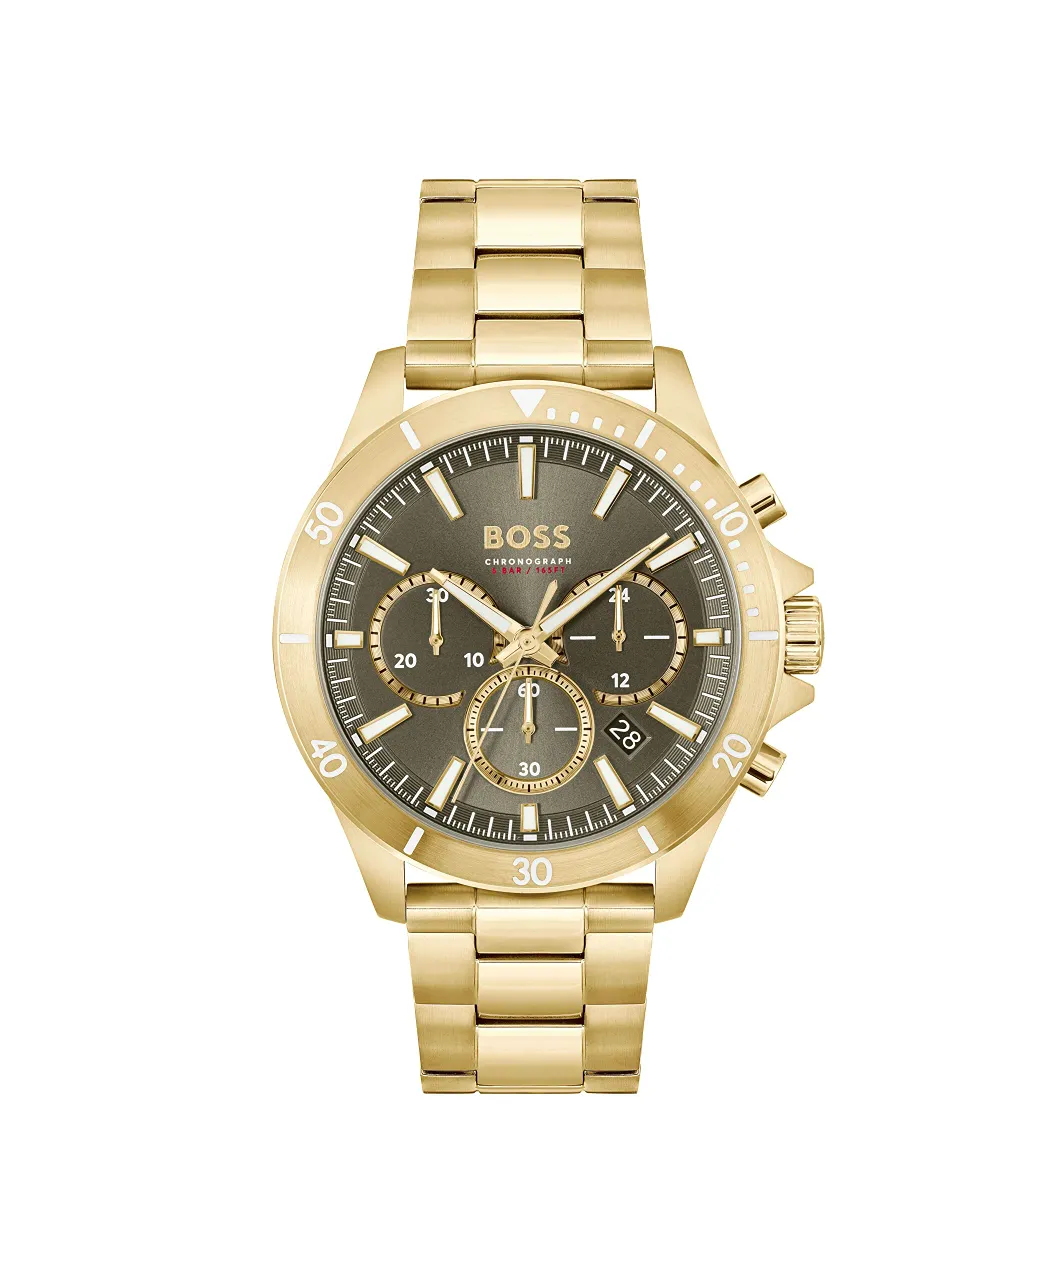 BOSS Chronograph Quartz Watch for men with Gold colored